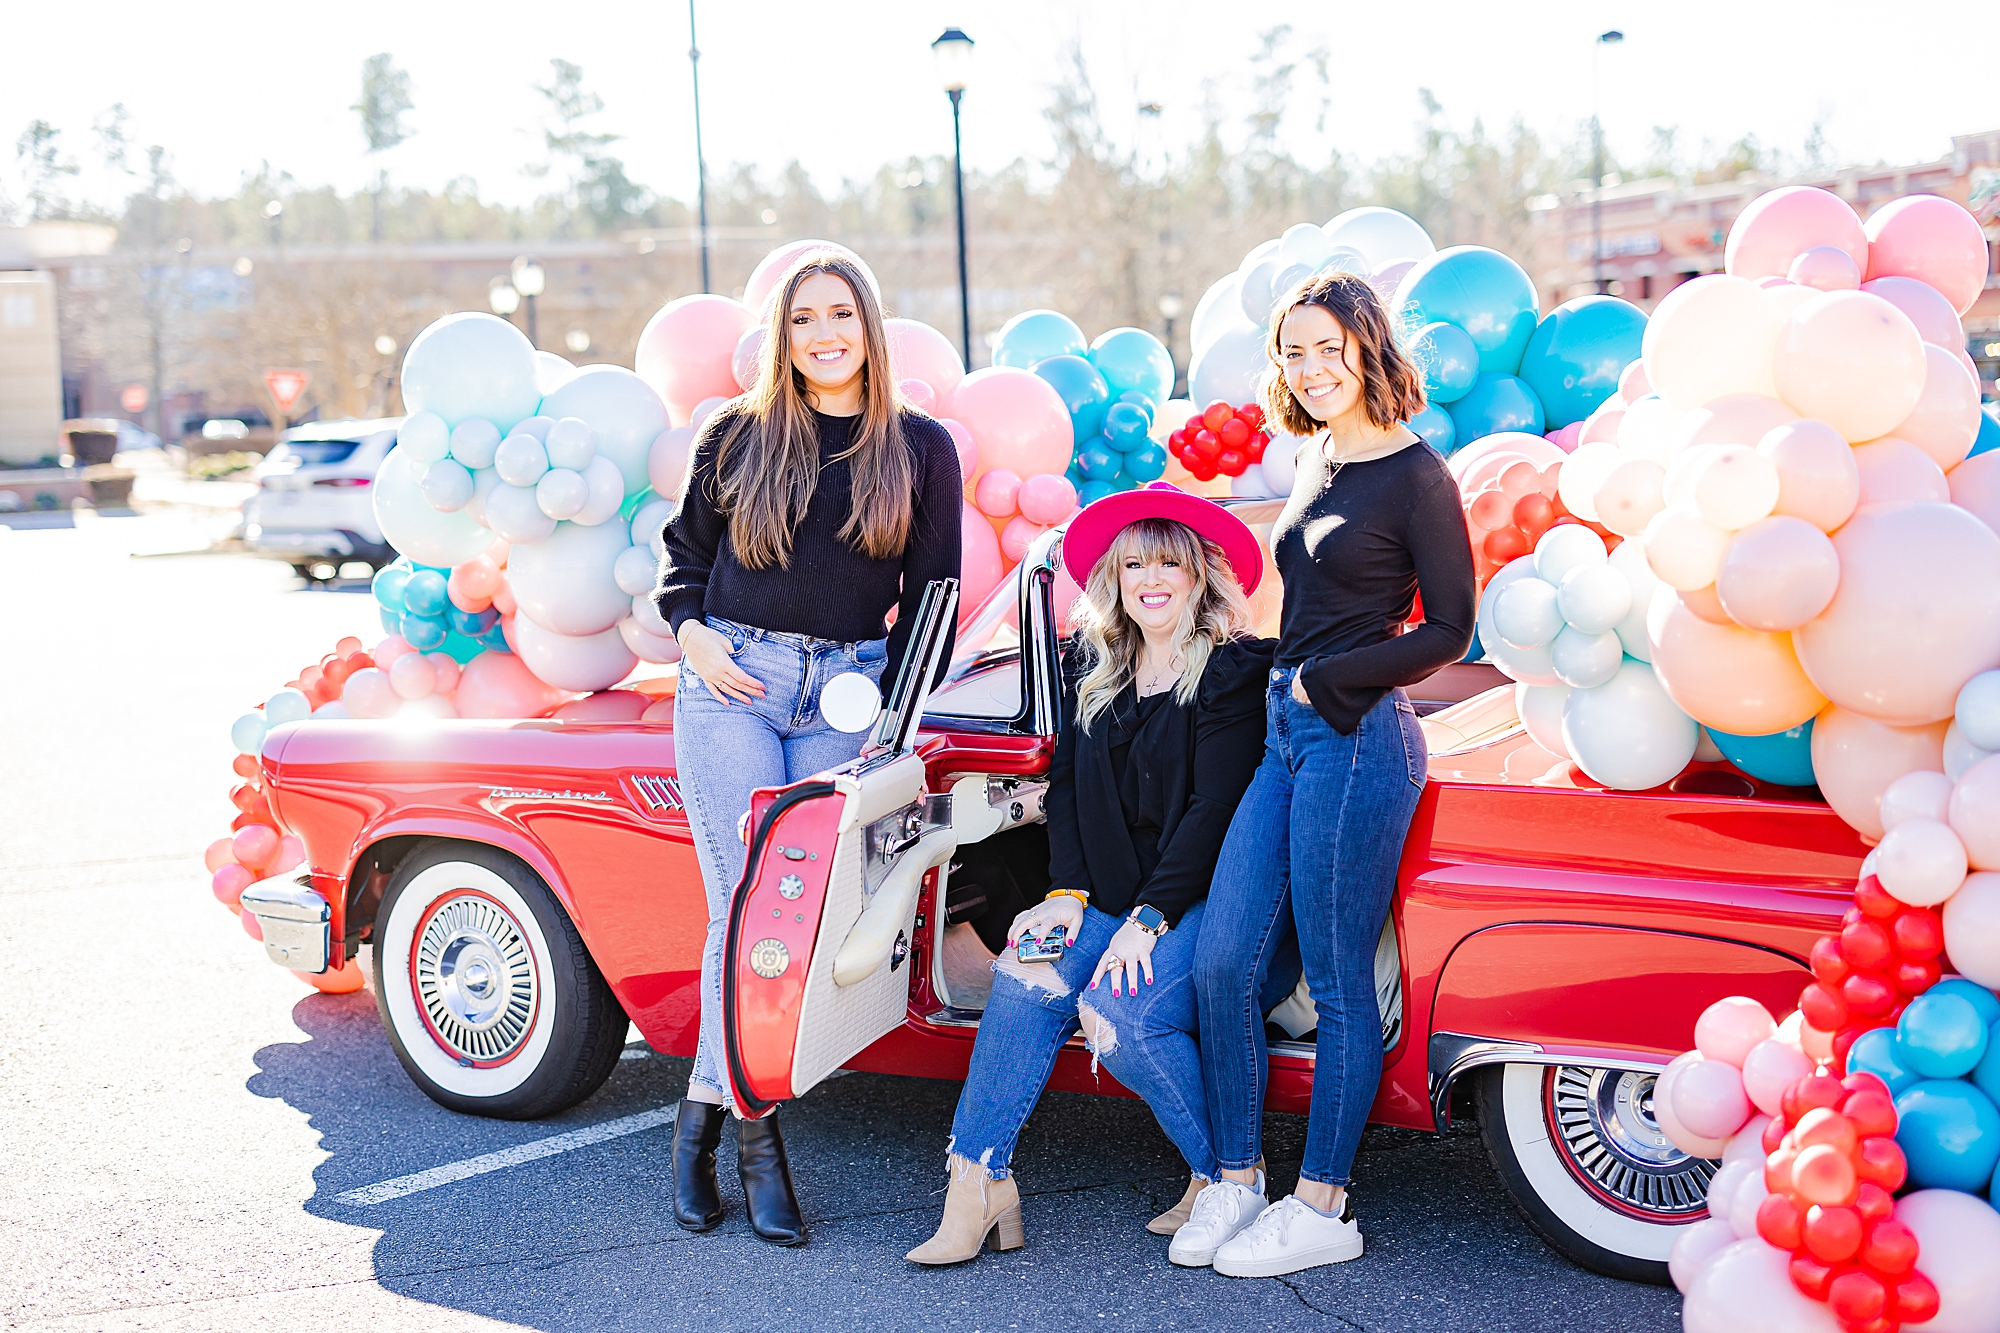 owners of Sips and Dips pose with red Thunderbird during Valentine’s Day photos